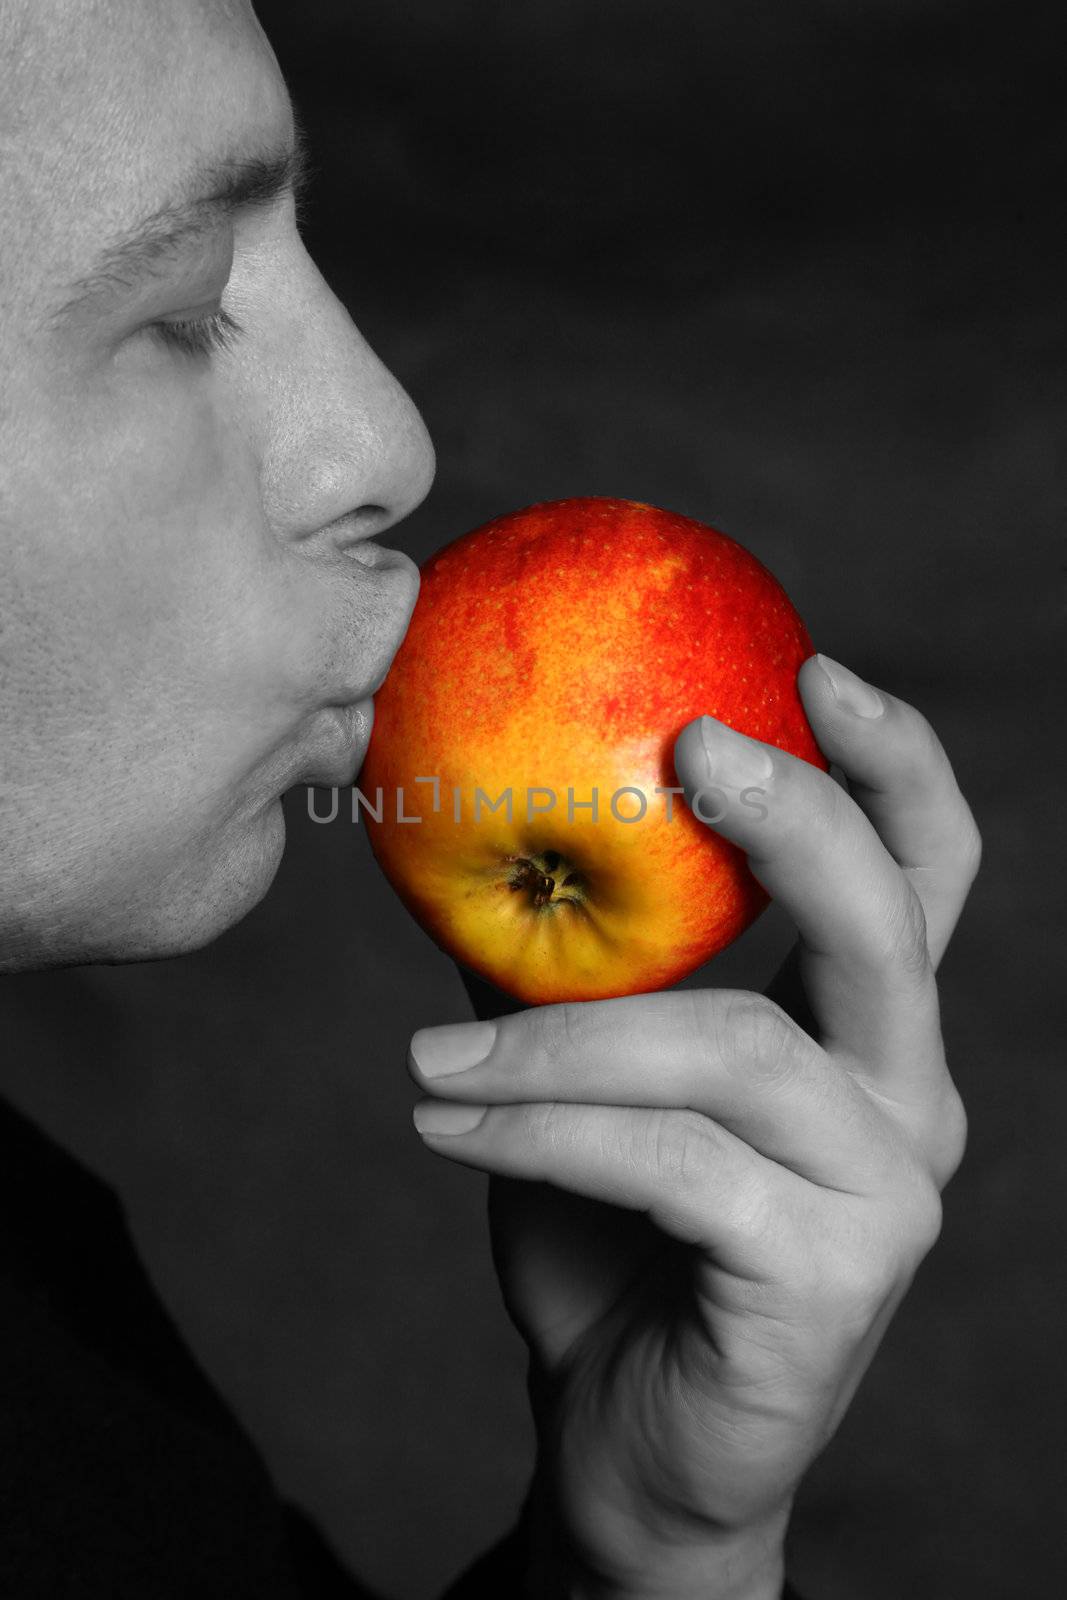 The man concerns lips of a red apple